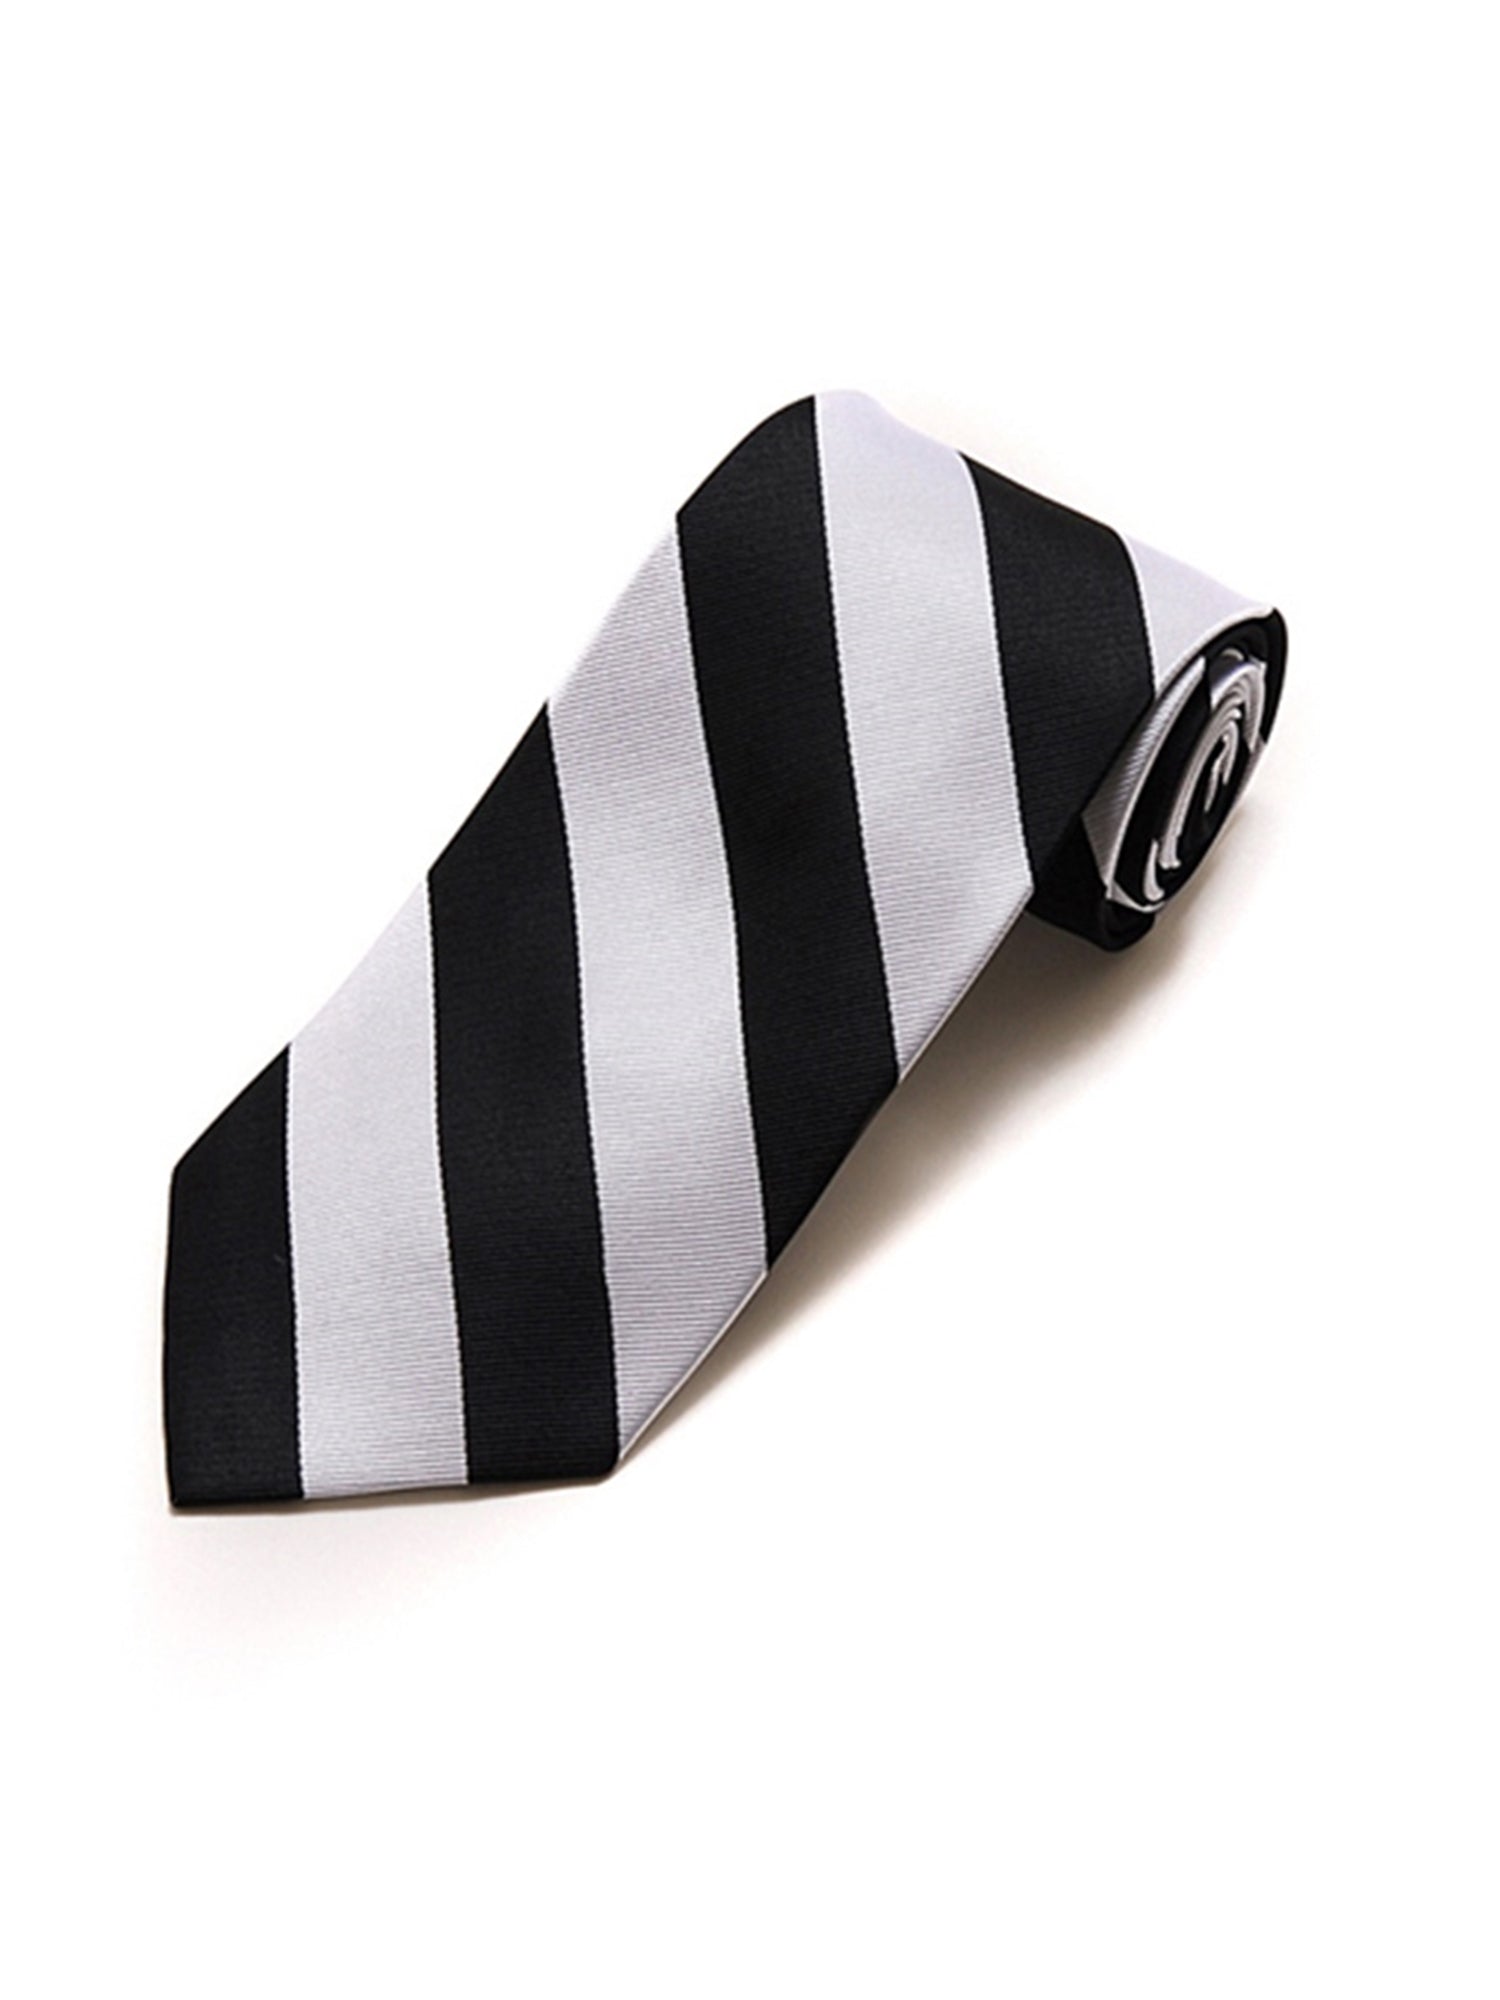 Men's College Striped Colored Silk Long Or X-Long Neck Tie Neck Tie TheDapperTie Silver & Black 57" long & 3.25" wide 